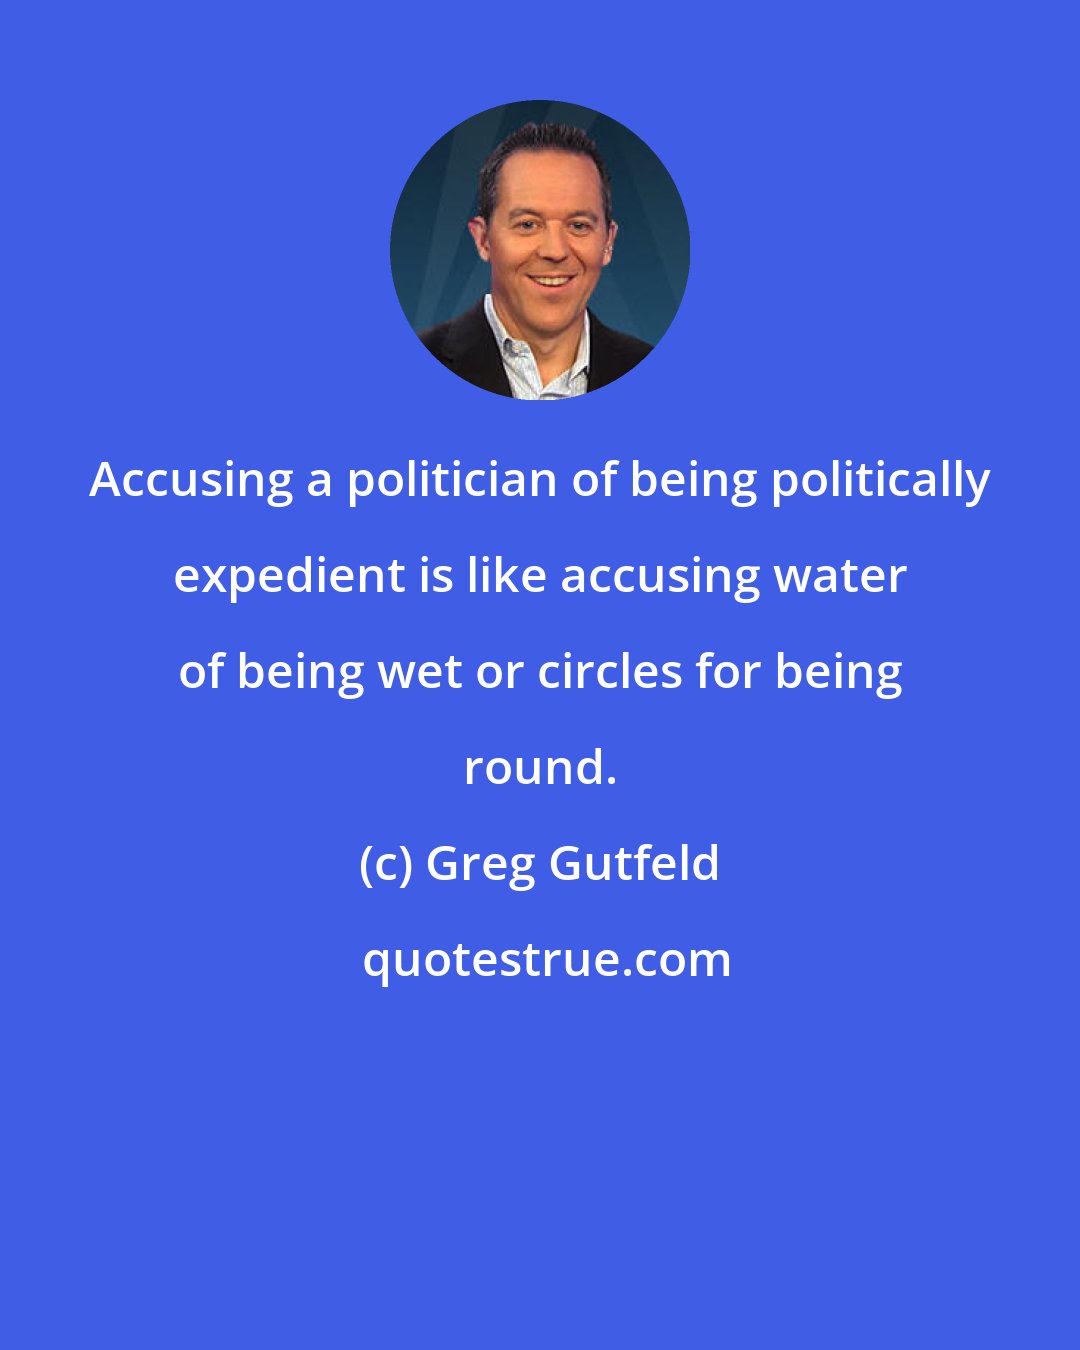 Greg Gutfeld: Accusing a politician of being politically expedient is like accusing water of being wet or circles for being round.